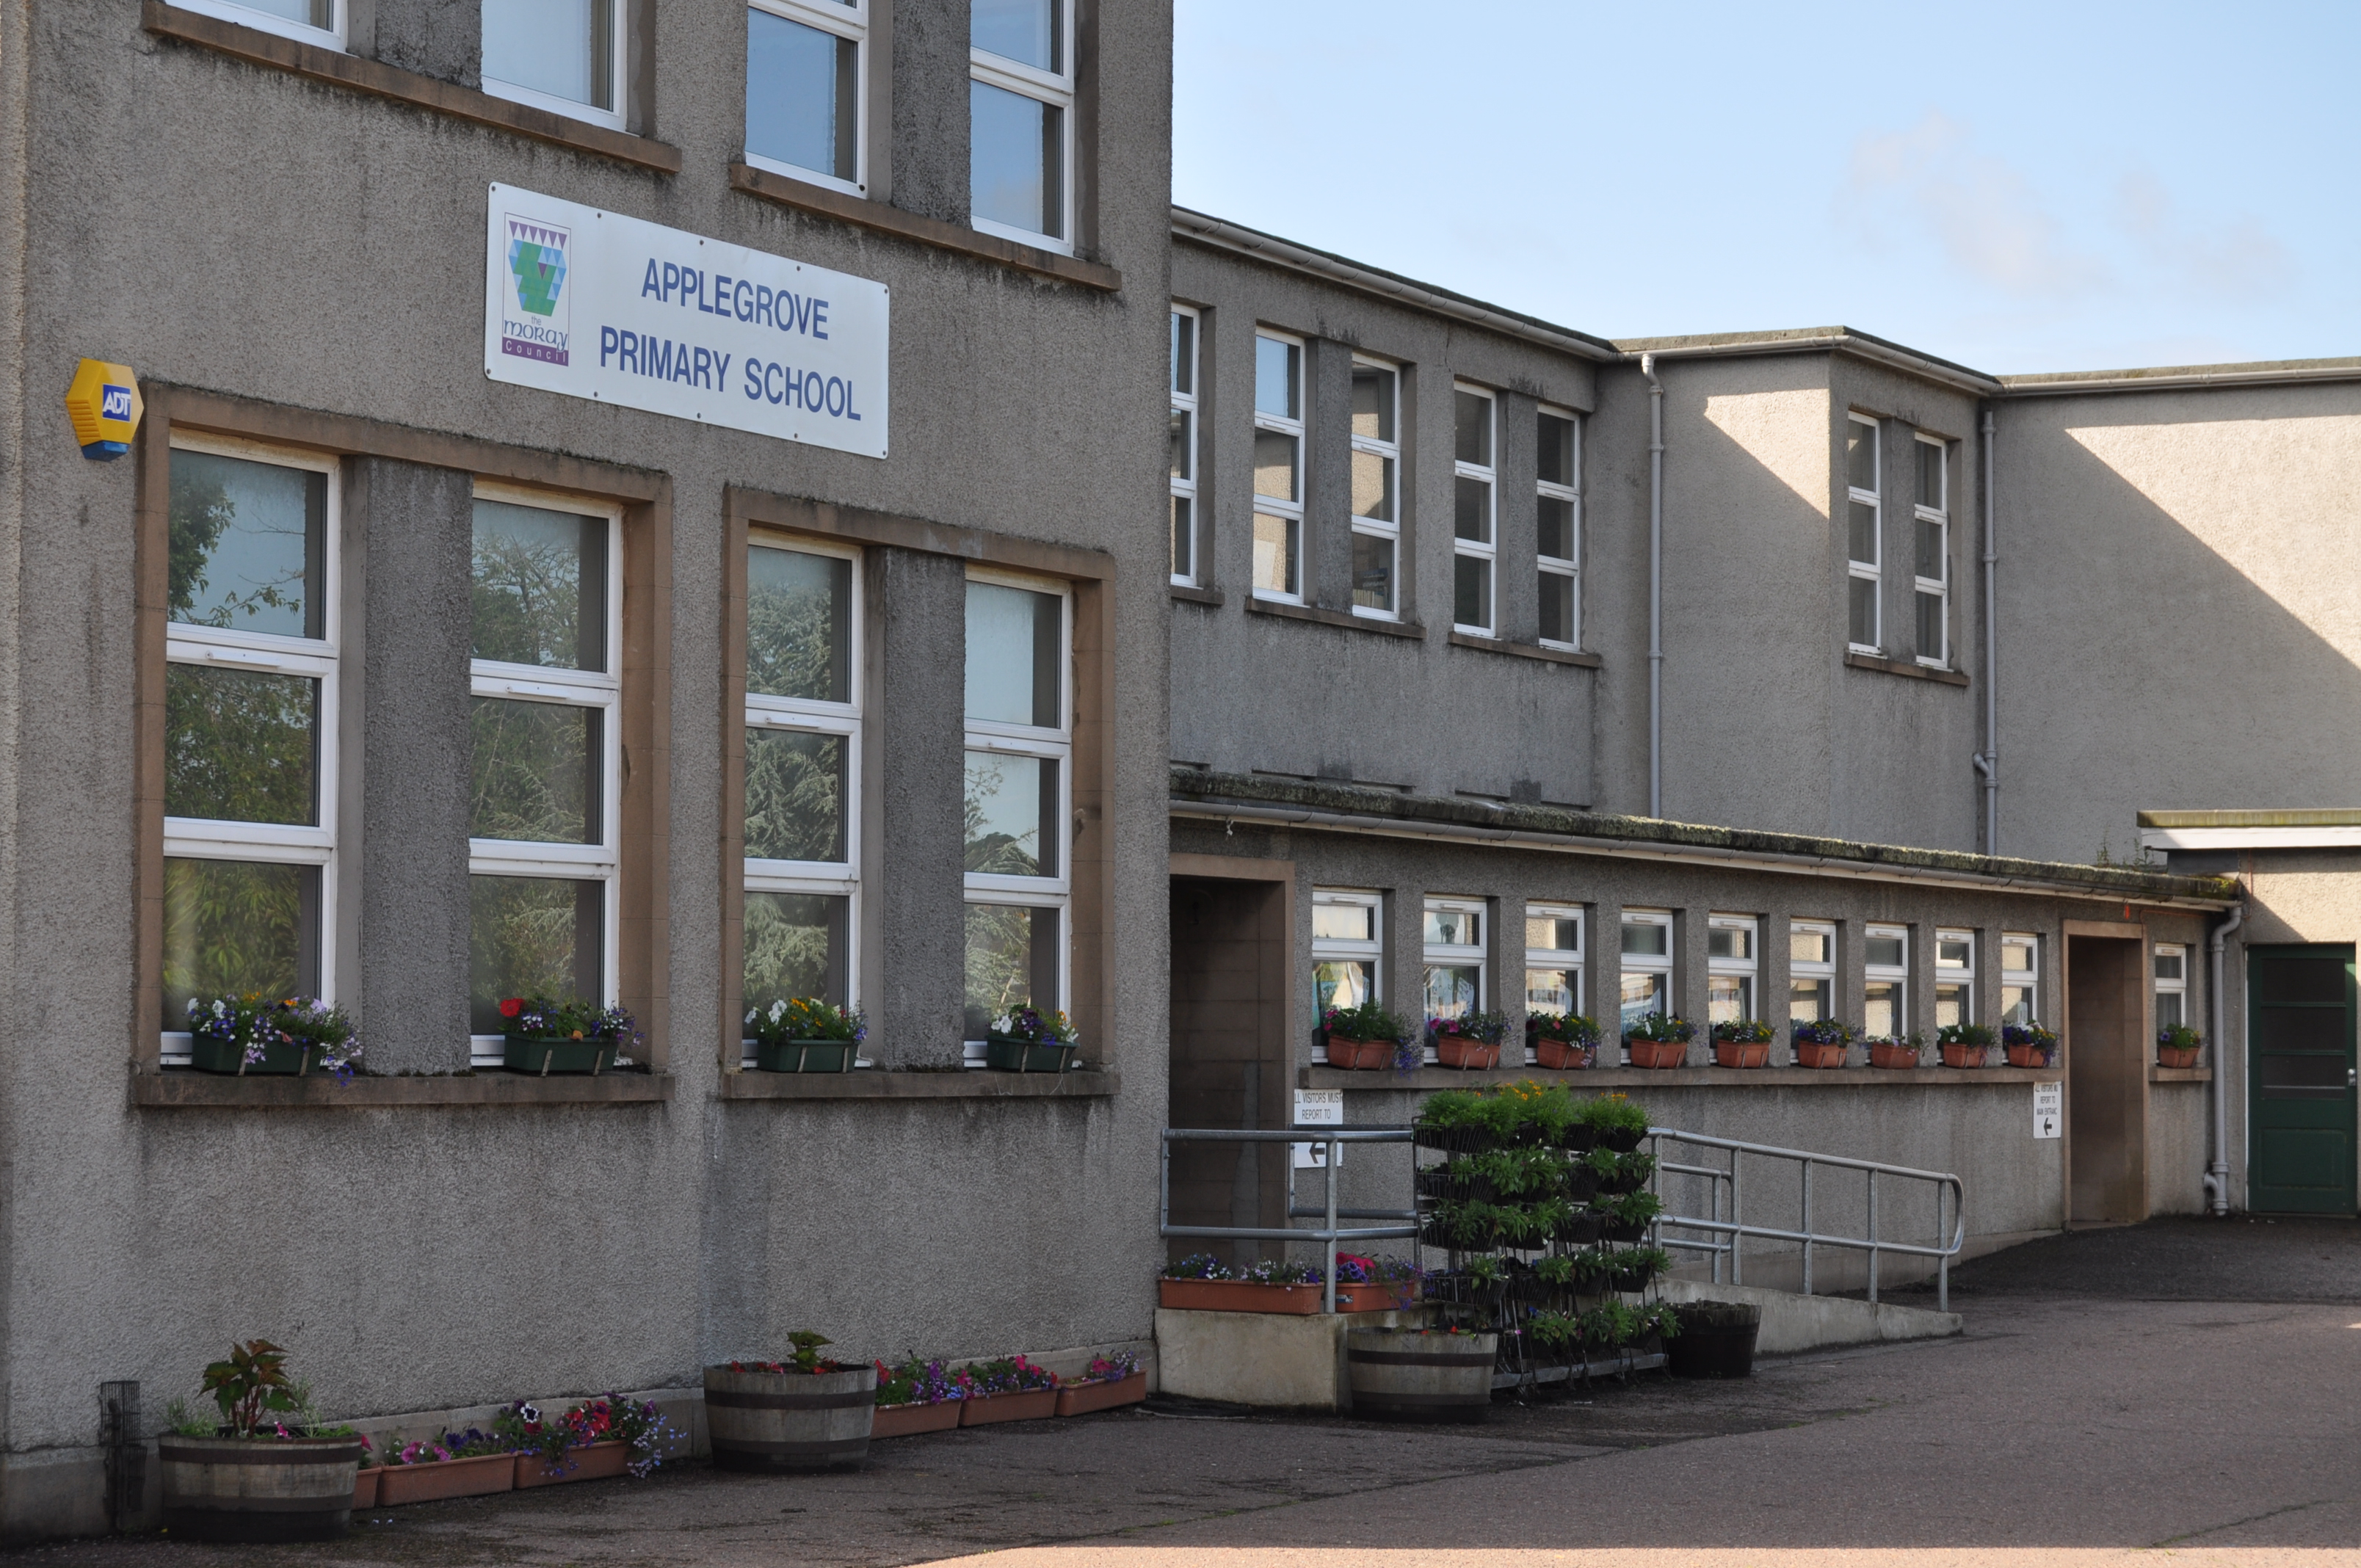 Moray approves £8.8m school refurb investment